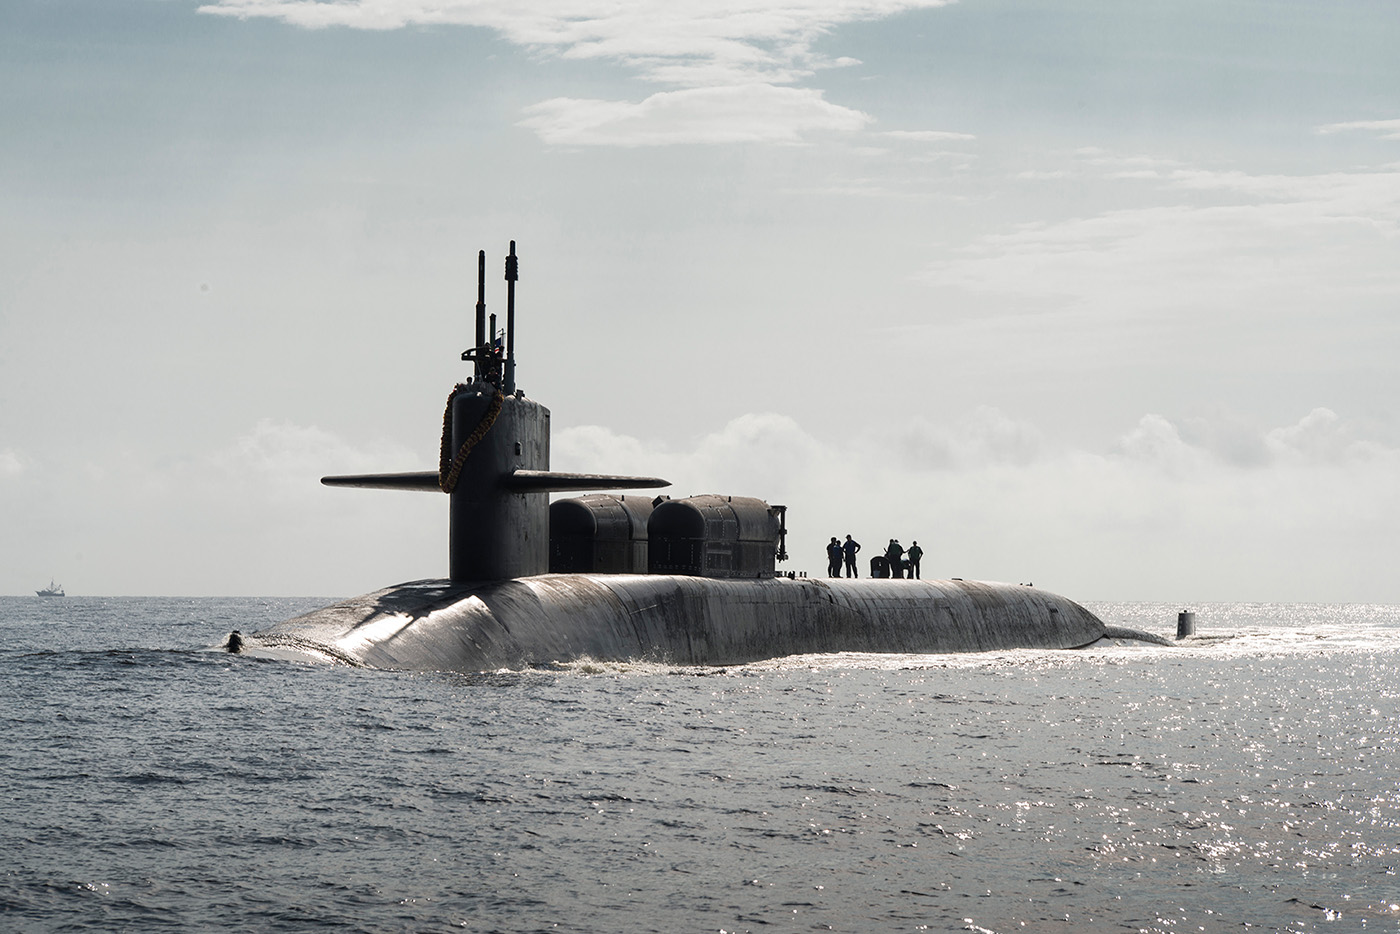 Ohio-class guided-missile submarines (SSGN) 